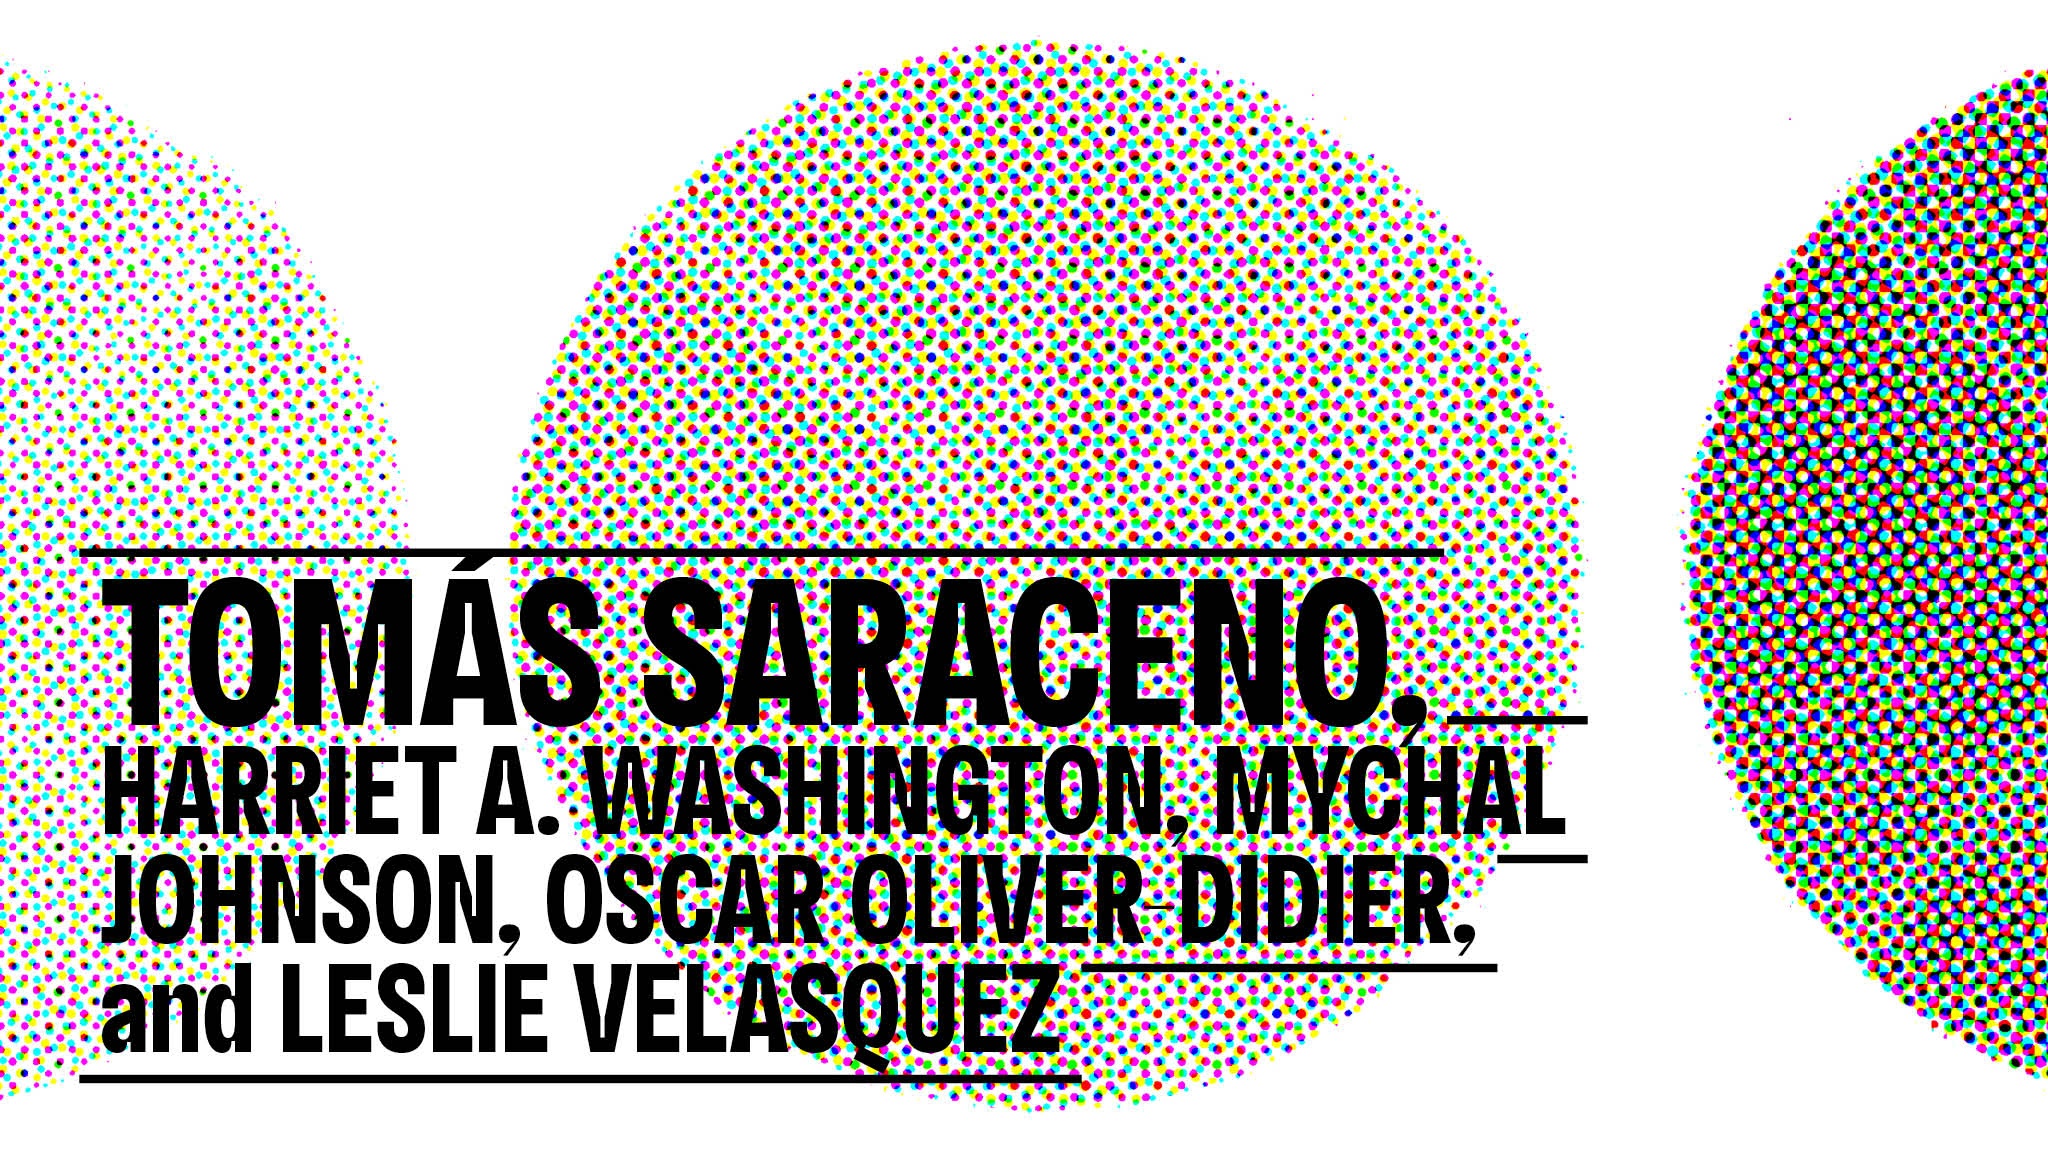 A collection of dots in a circular pattern on a white background overlaid with the names Tomás Saraceno, Harriet A. Washington, Mychal Johnson, Oscar Oliver-Didier, and Leslie Velasquez